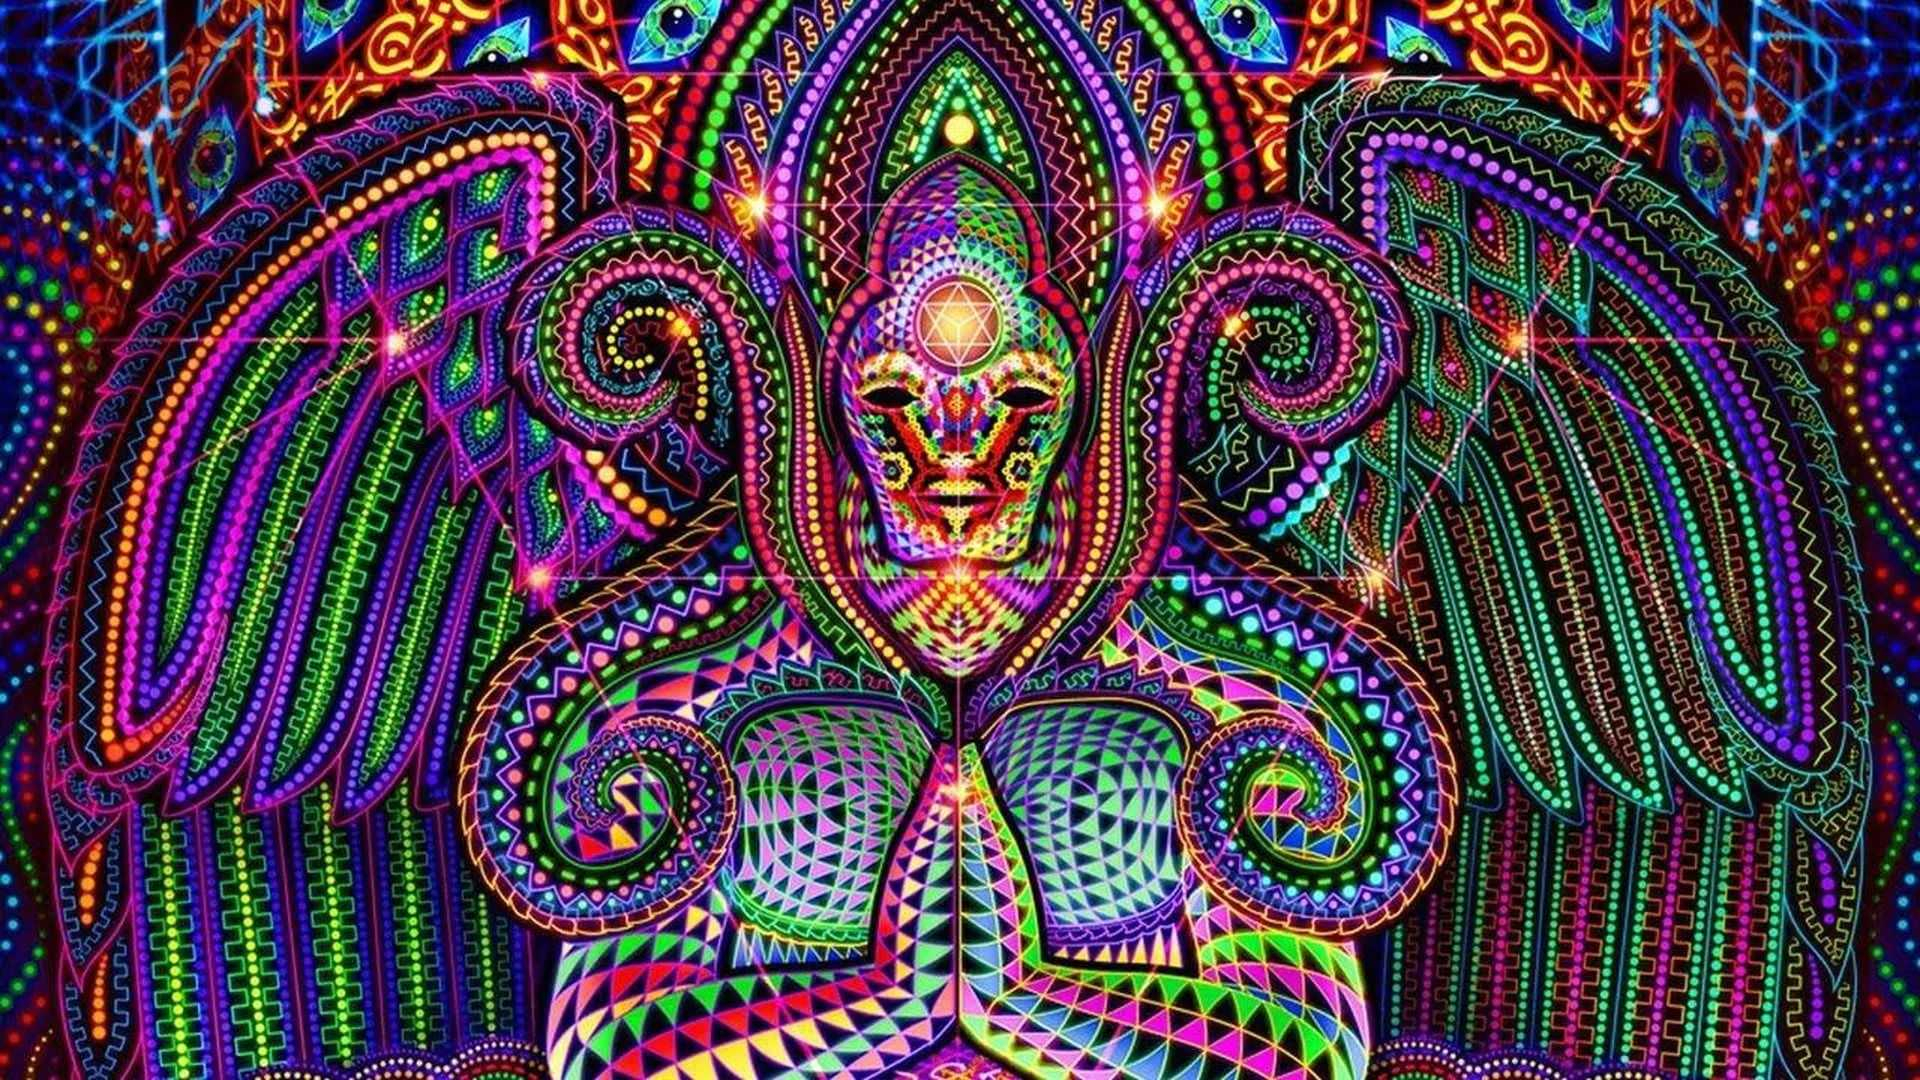 1920x1080 Psychedelic Art Wallpaper Awesome Free HD Wallpapers